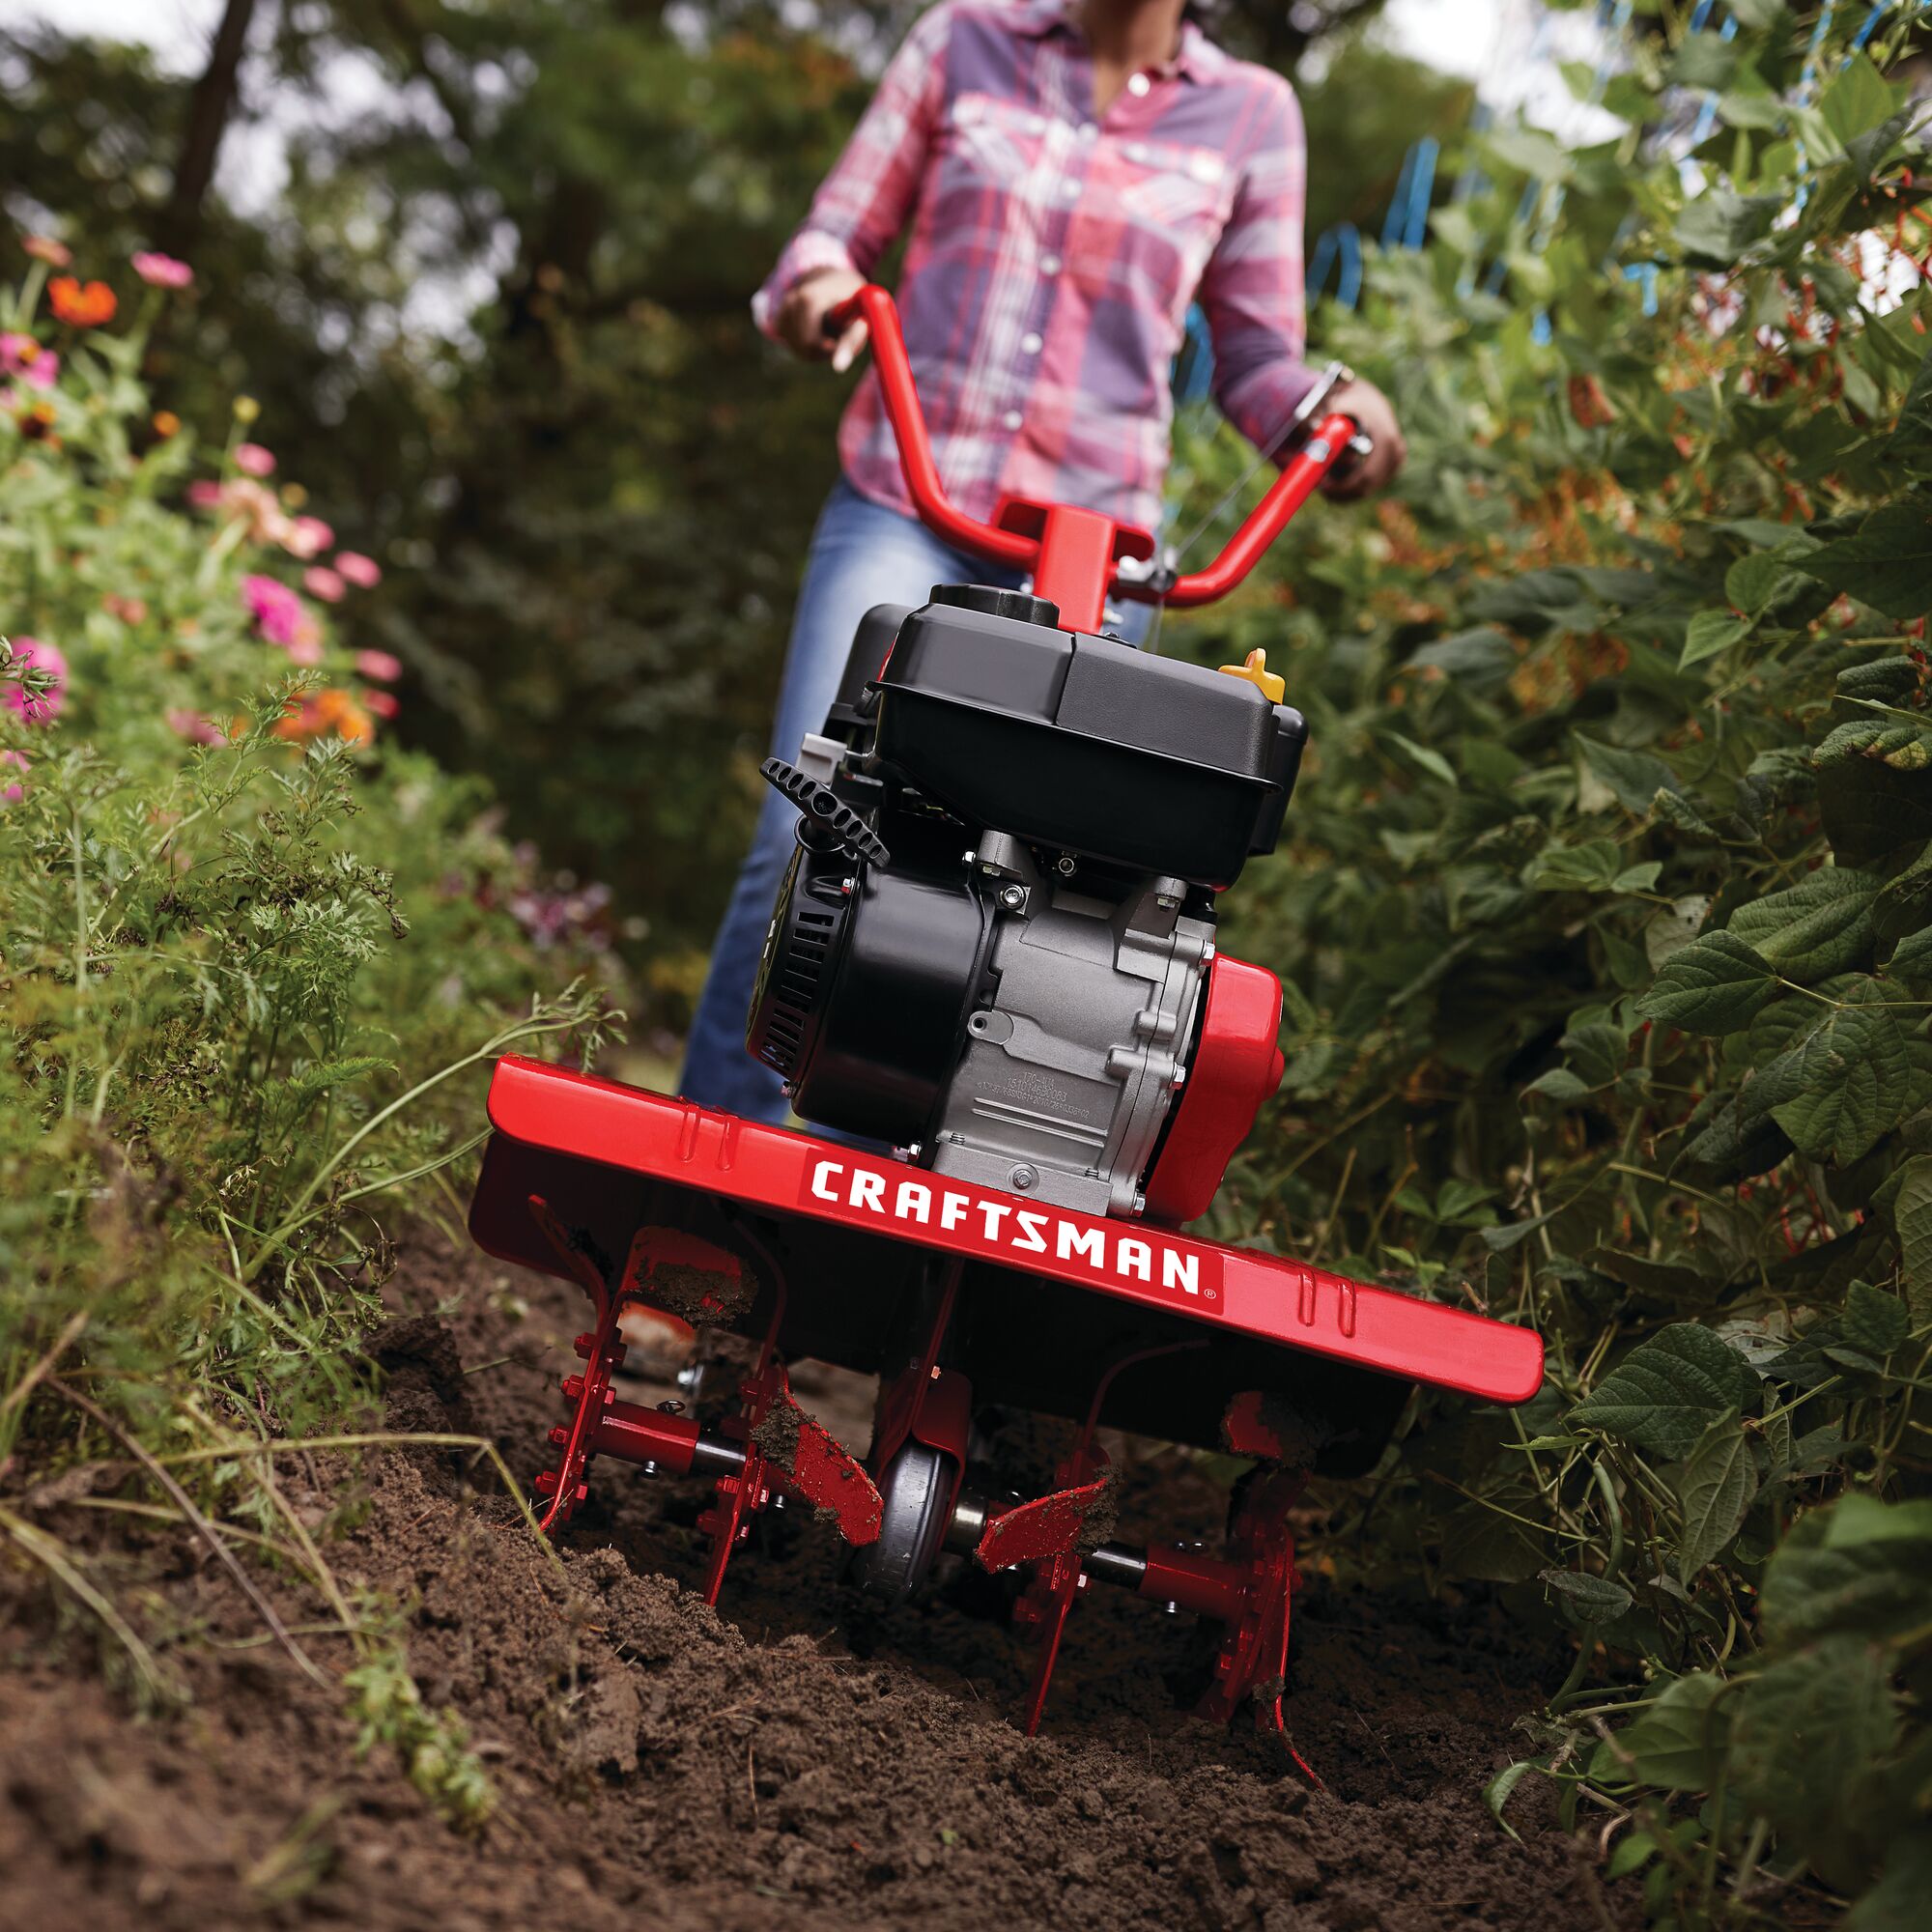 View of CRAFTSMAN Tillers  being used by consumer